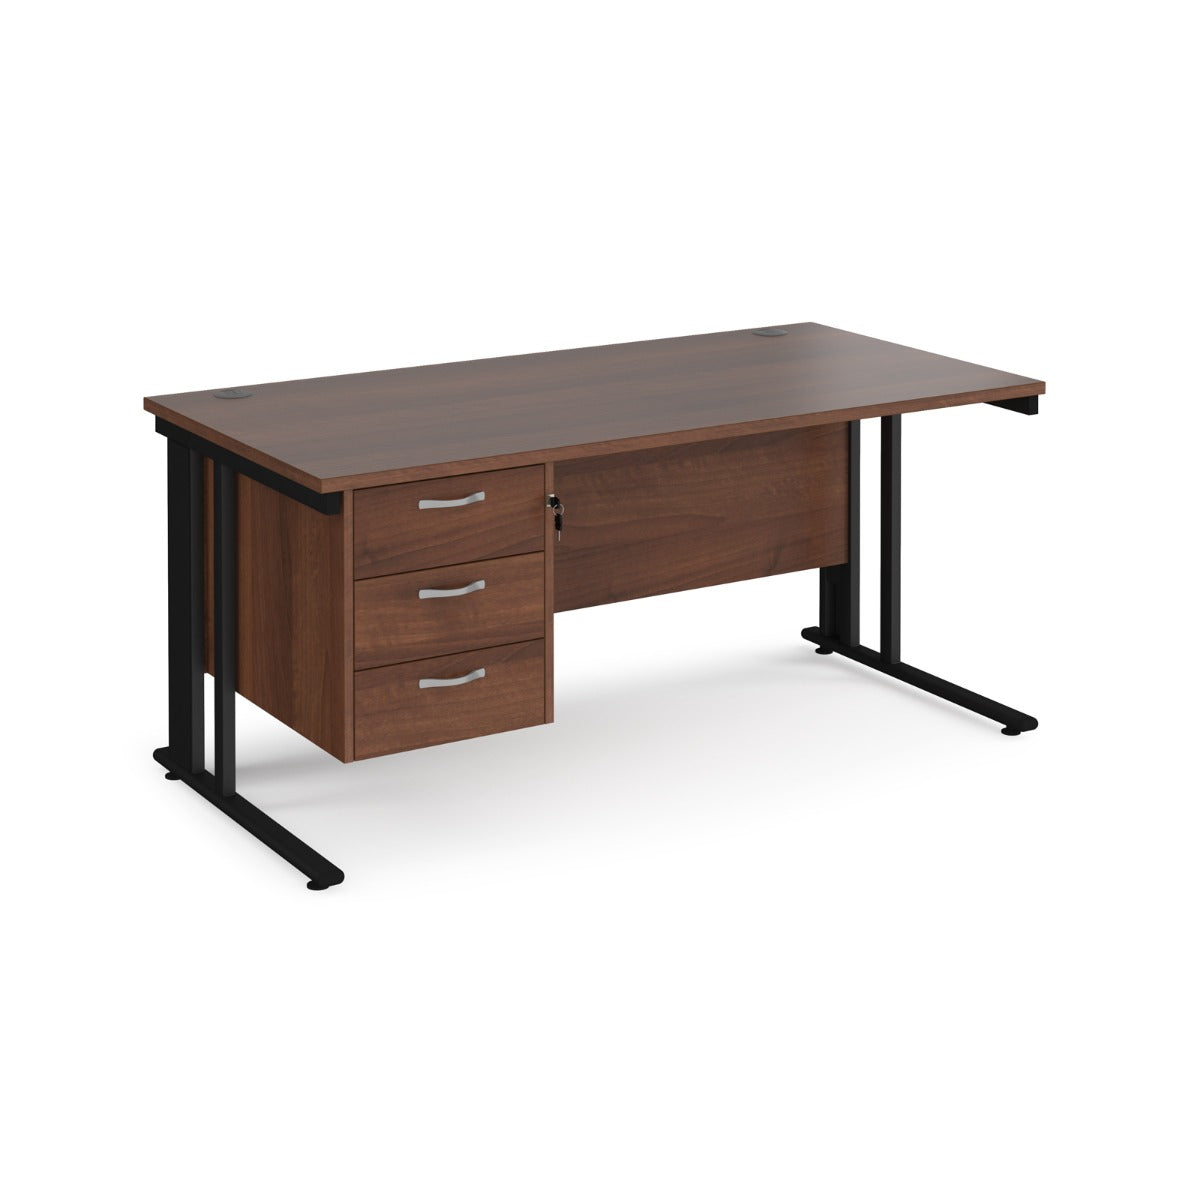 Maestro 800mm Deep Straight Cable Management Leg Office Desk with Three Drawer Pedestal